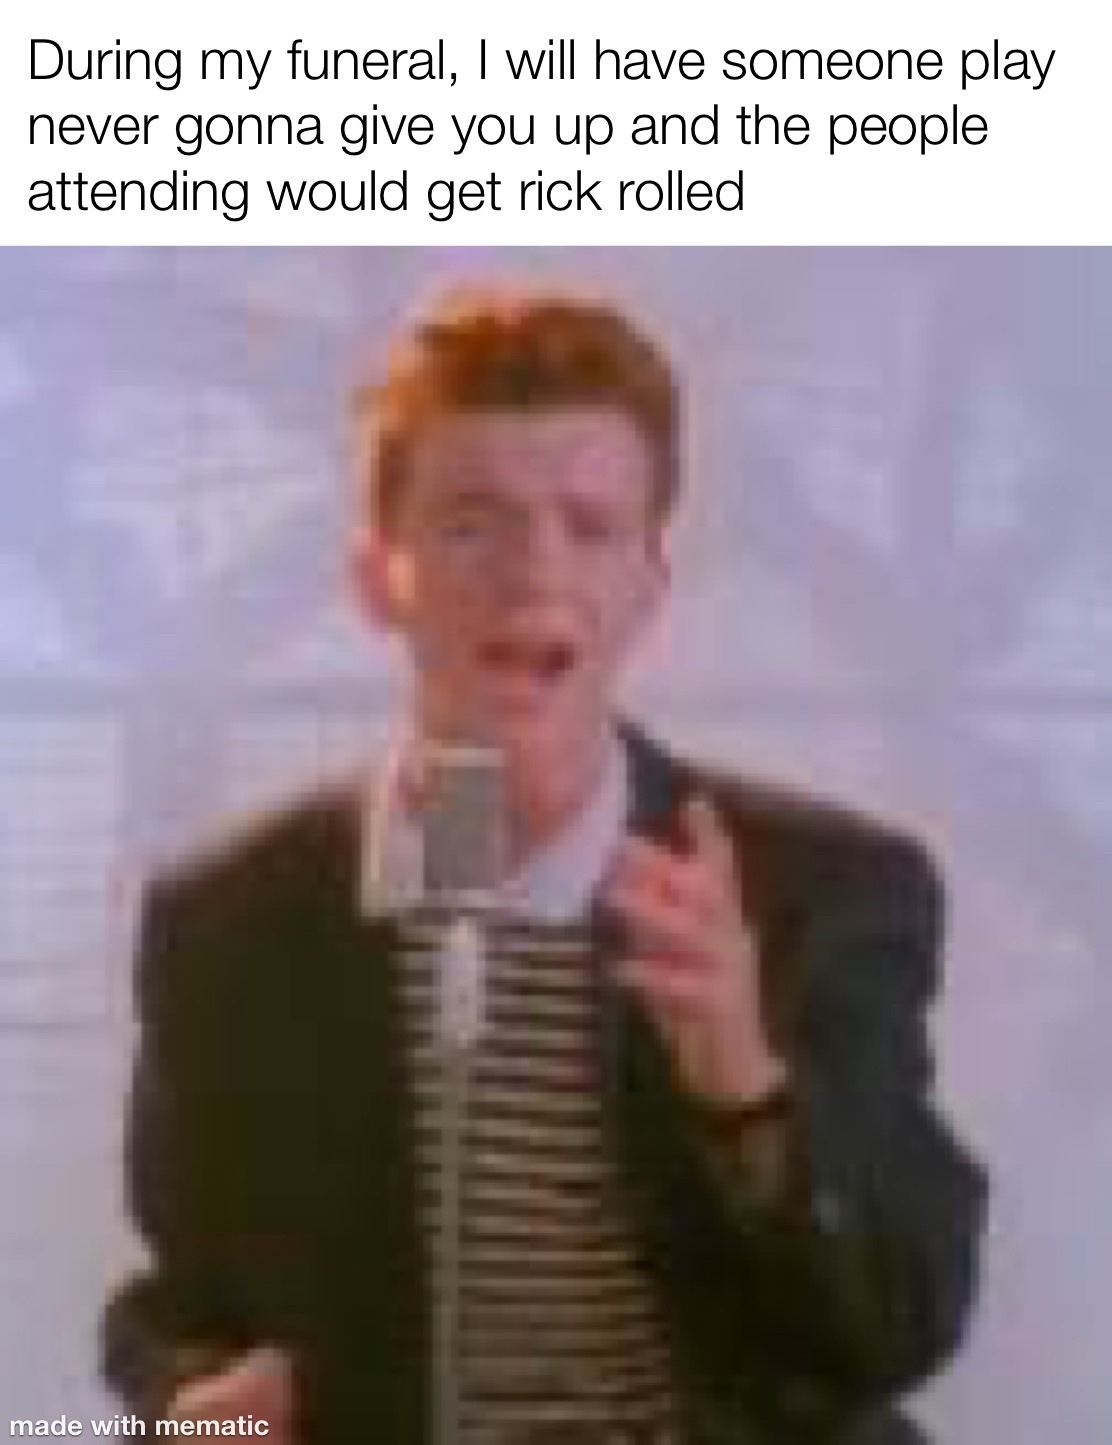 this is a rick roll - meme